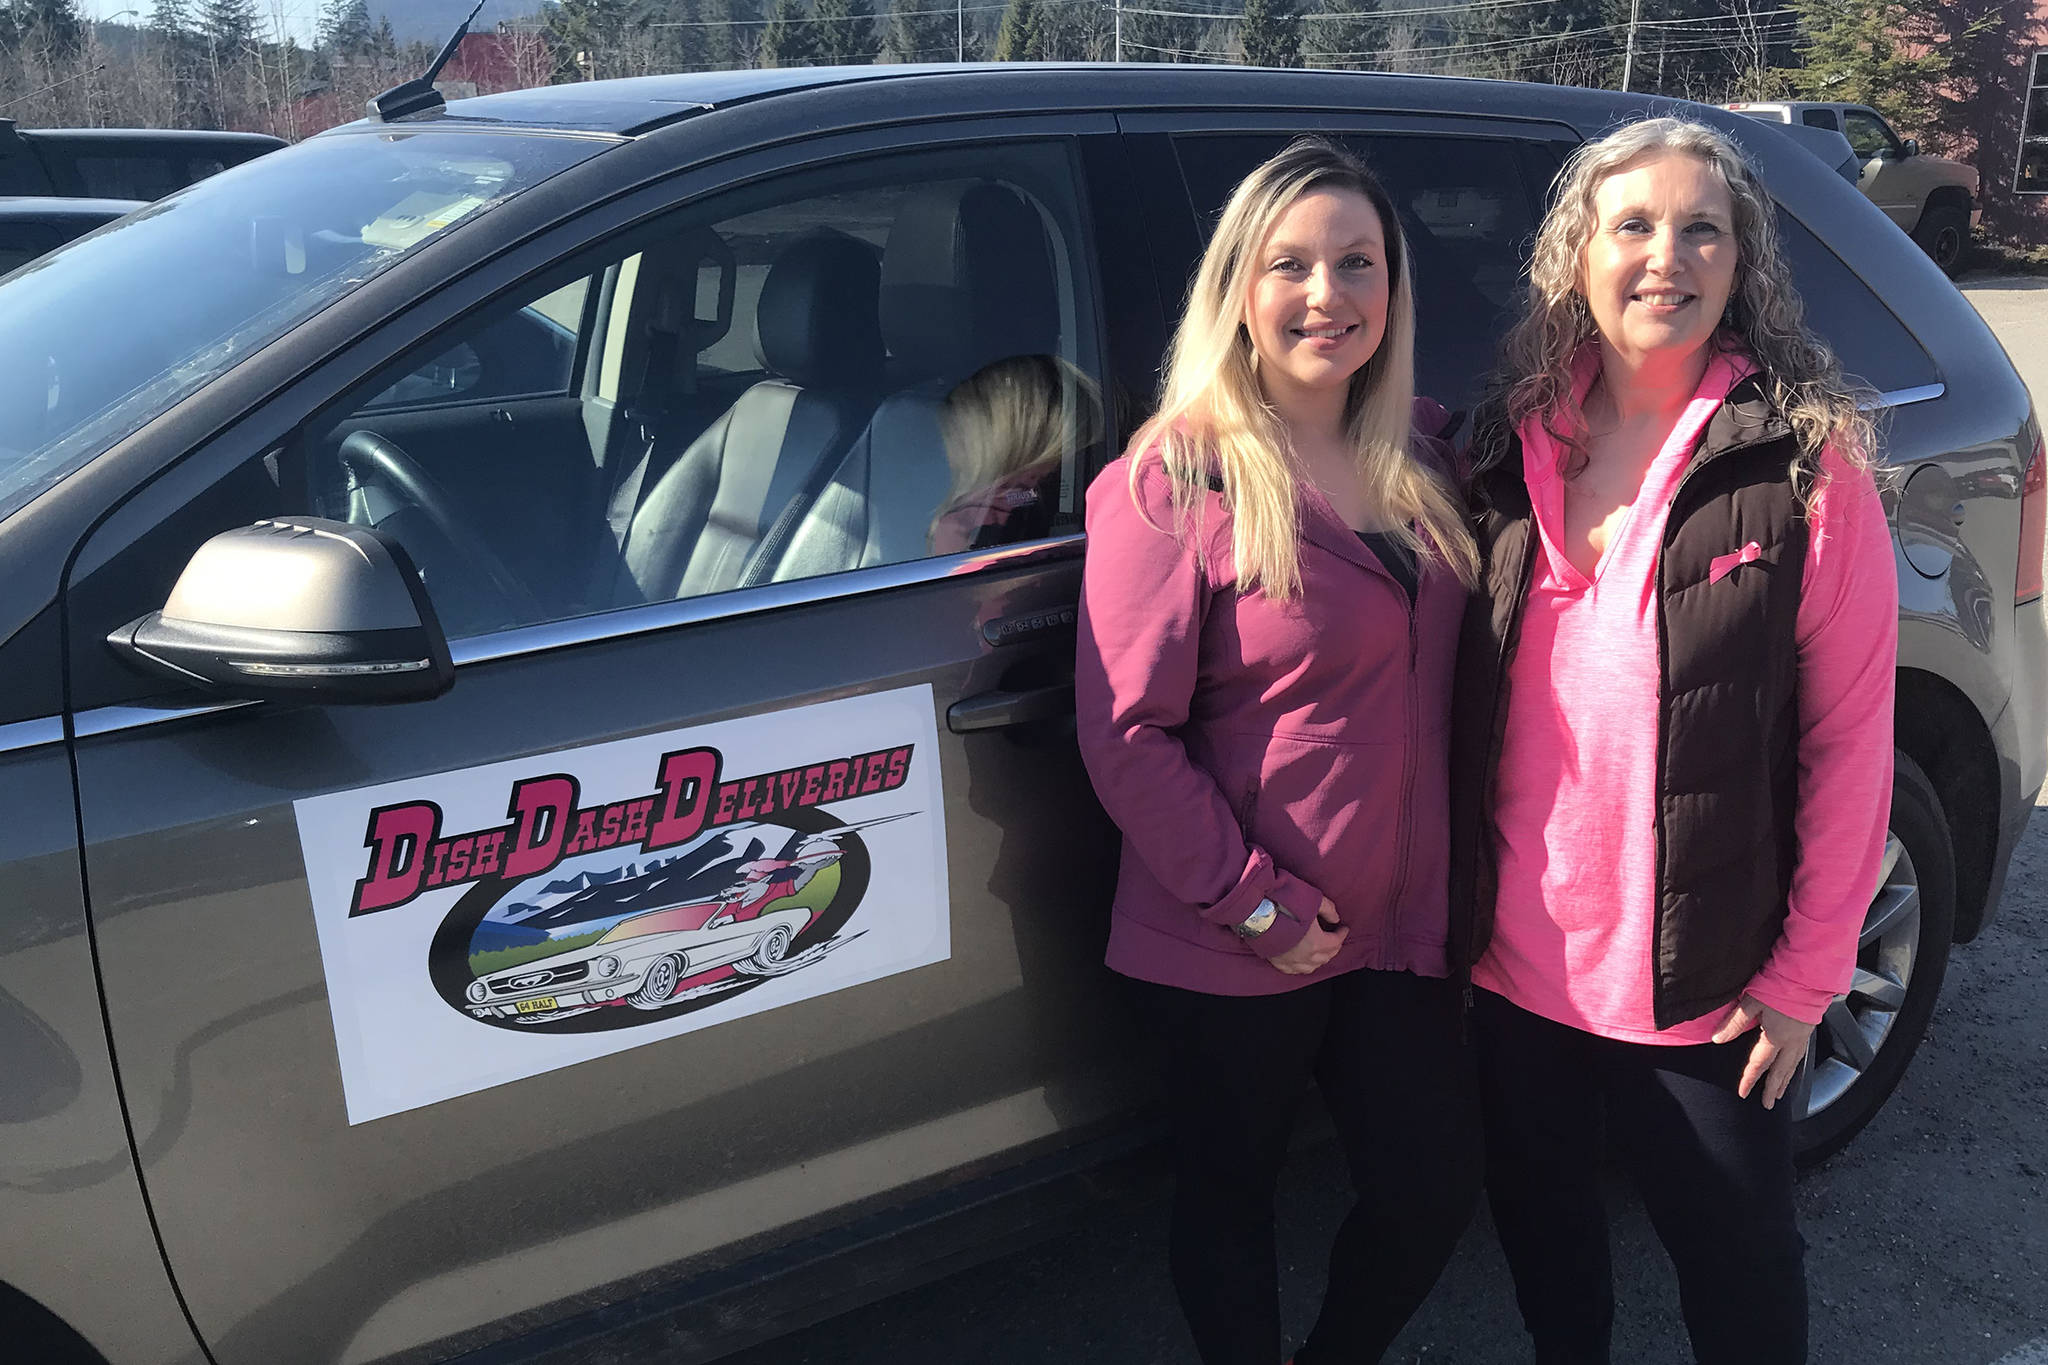 Corinna Nelson-Felkl, left, and Colleen Belardi, right, owners of Dish Dash Deliveries stand next to their logo on Friday, March 29, 2019. Dish Dash Deliveries will start operating on May 1. (Mollie Barnes | Juneau Empire)